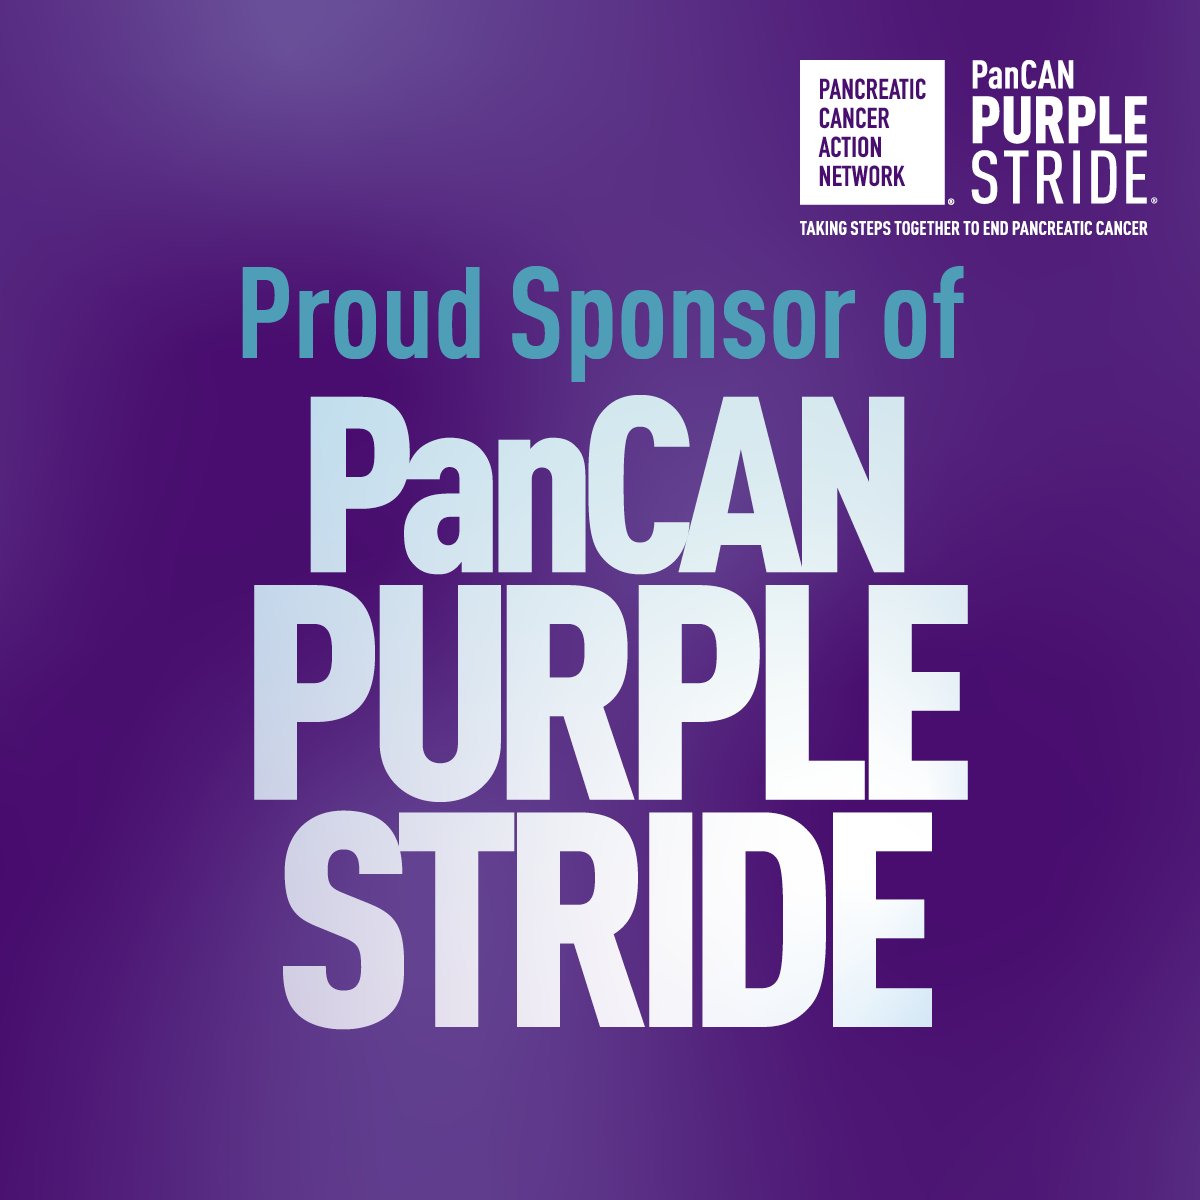 We are less than a week away from the 16th annual @PanCAN PurpleStride walk! Dr. @aguilera_md will be leading our team, the Rad Onc Purple Beam Team! Join us this Saturday! bit.ly/3Tug1ir